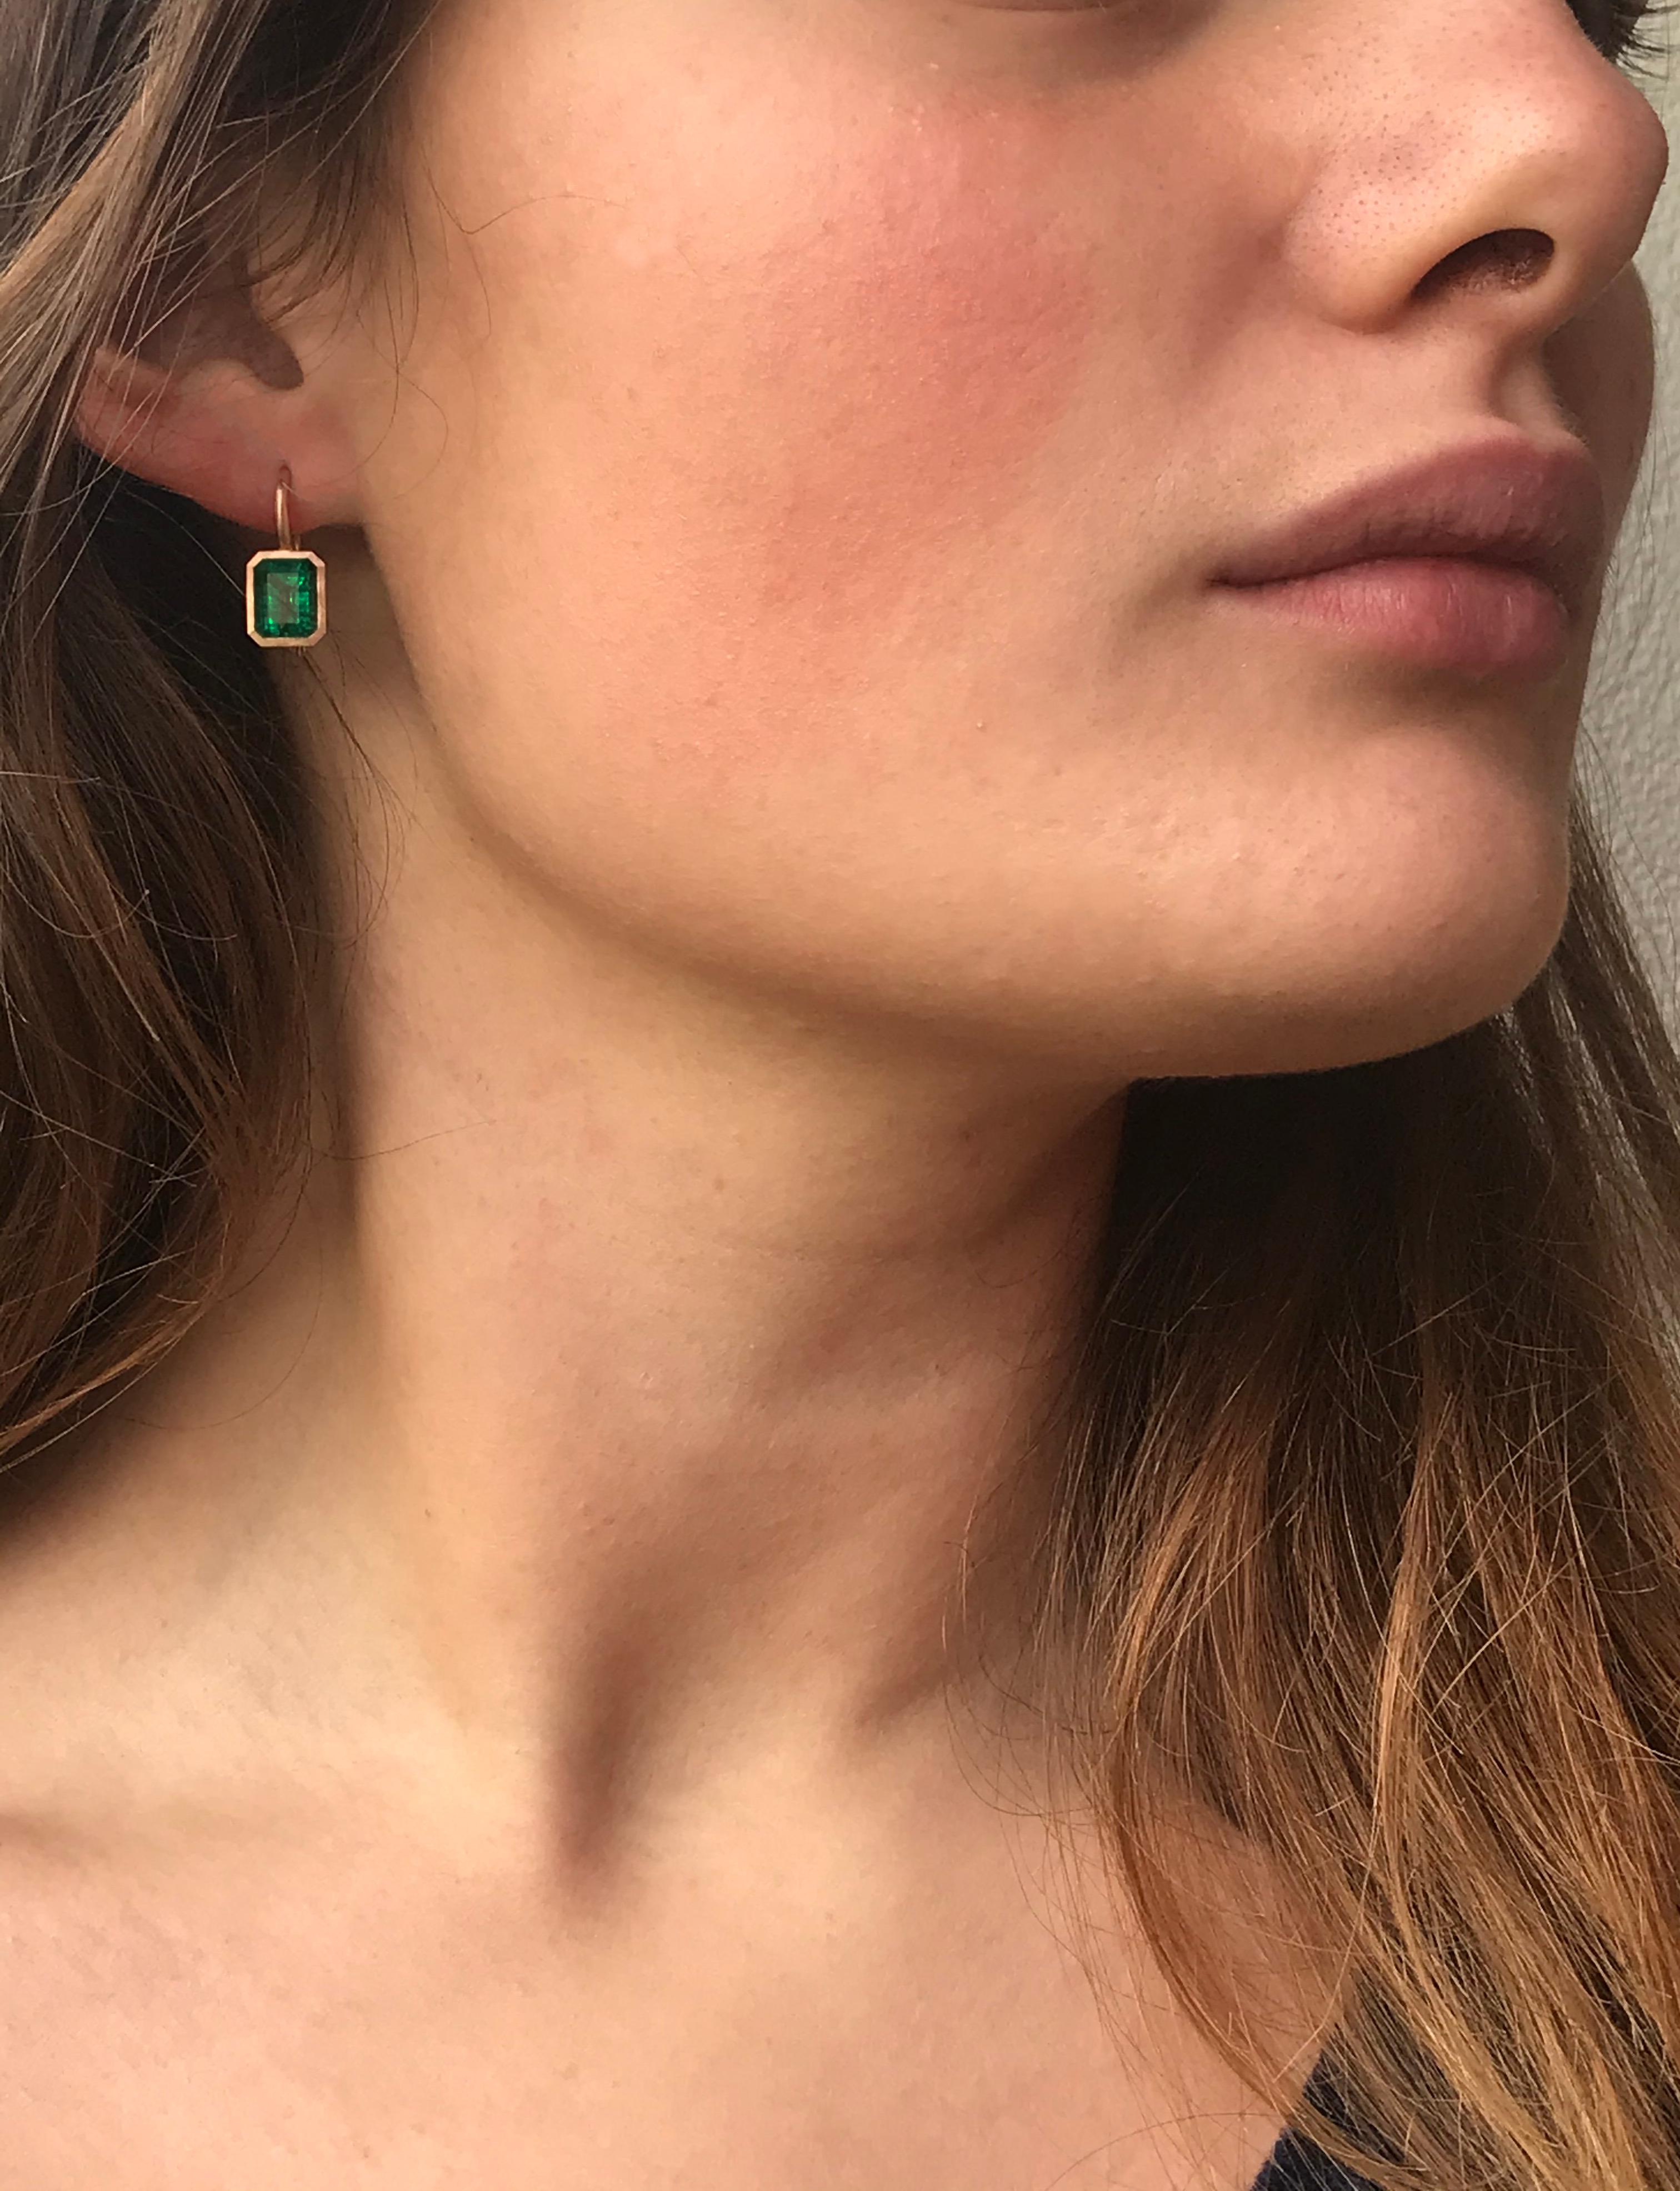 rose gold and green earrings